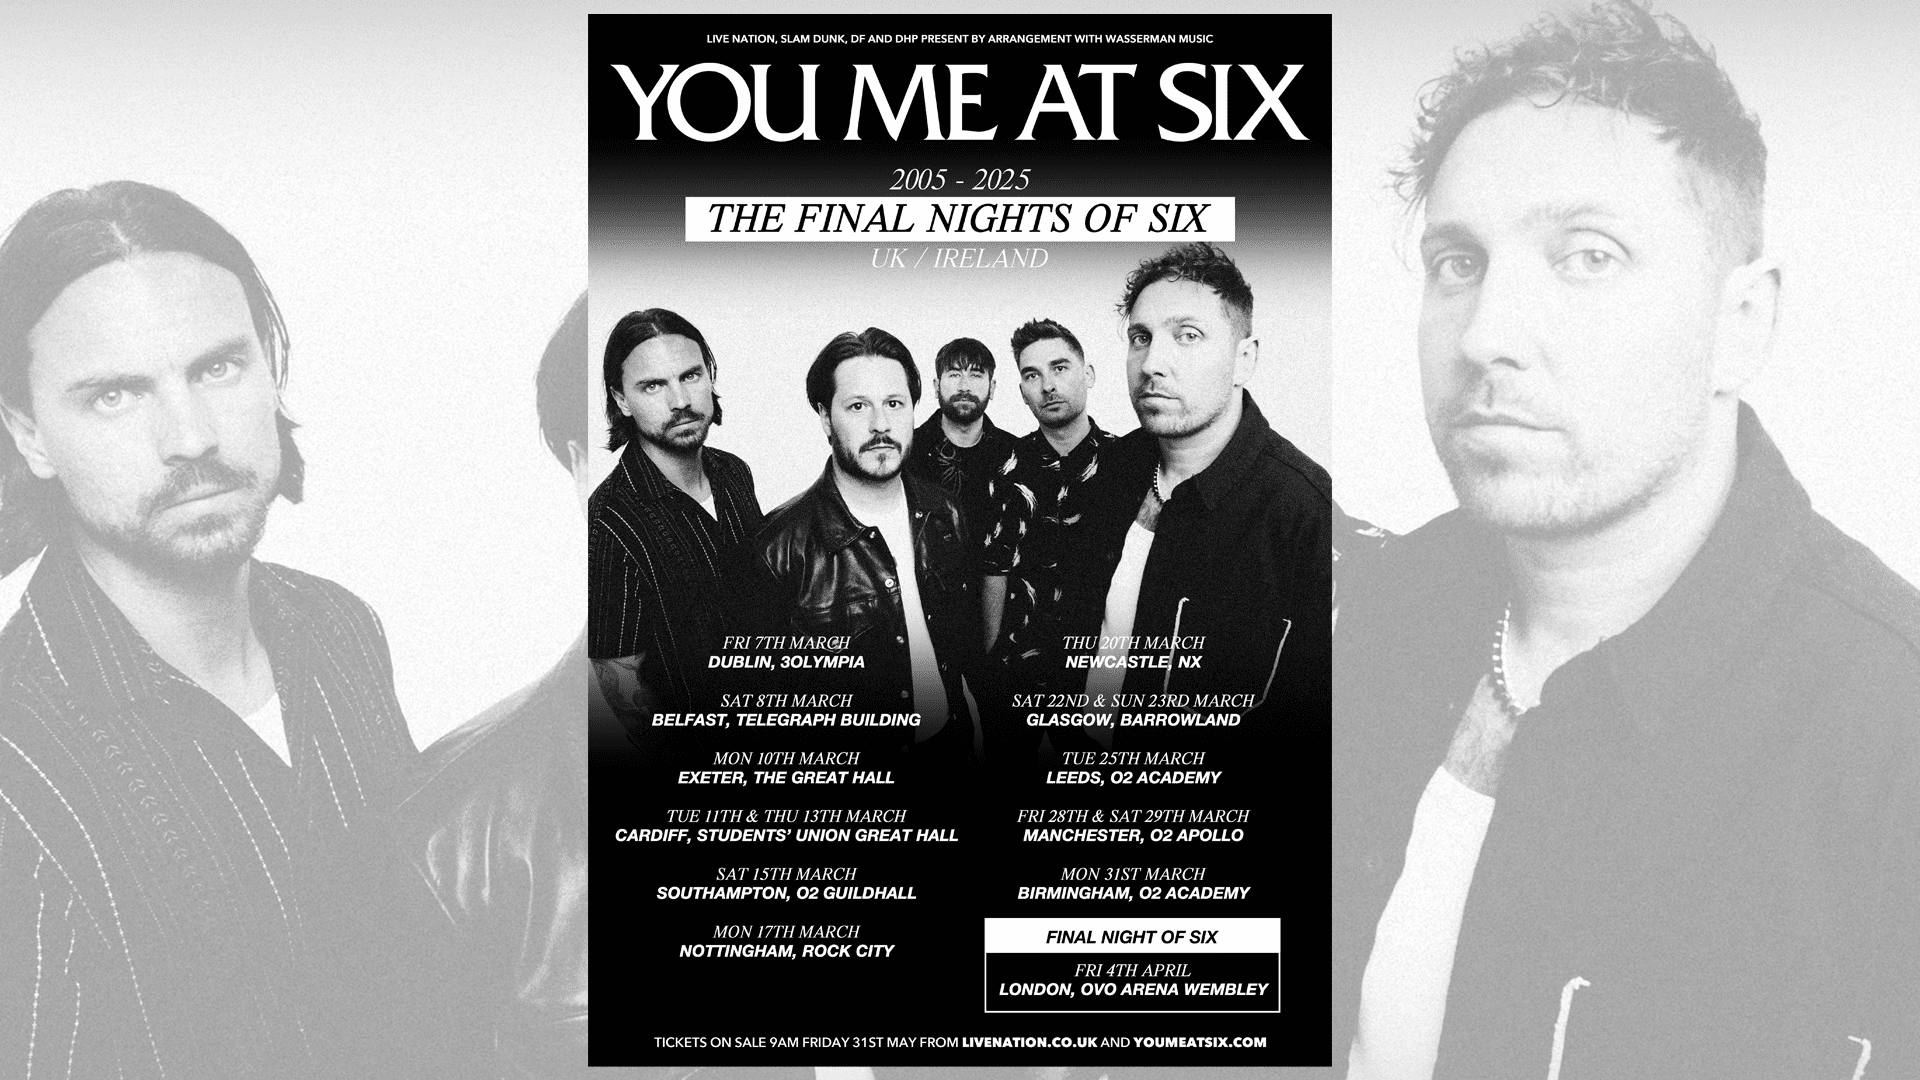 You Me at Six: The Final Nights of Six